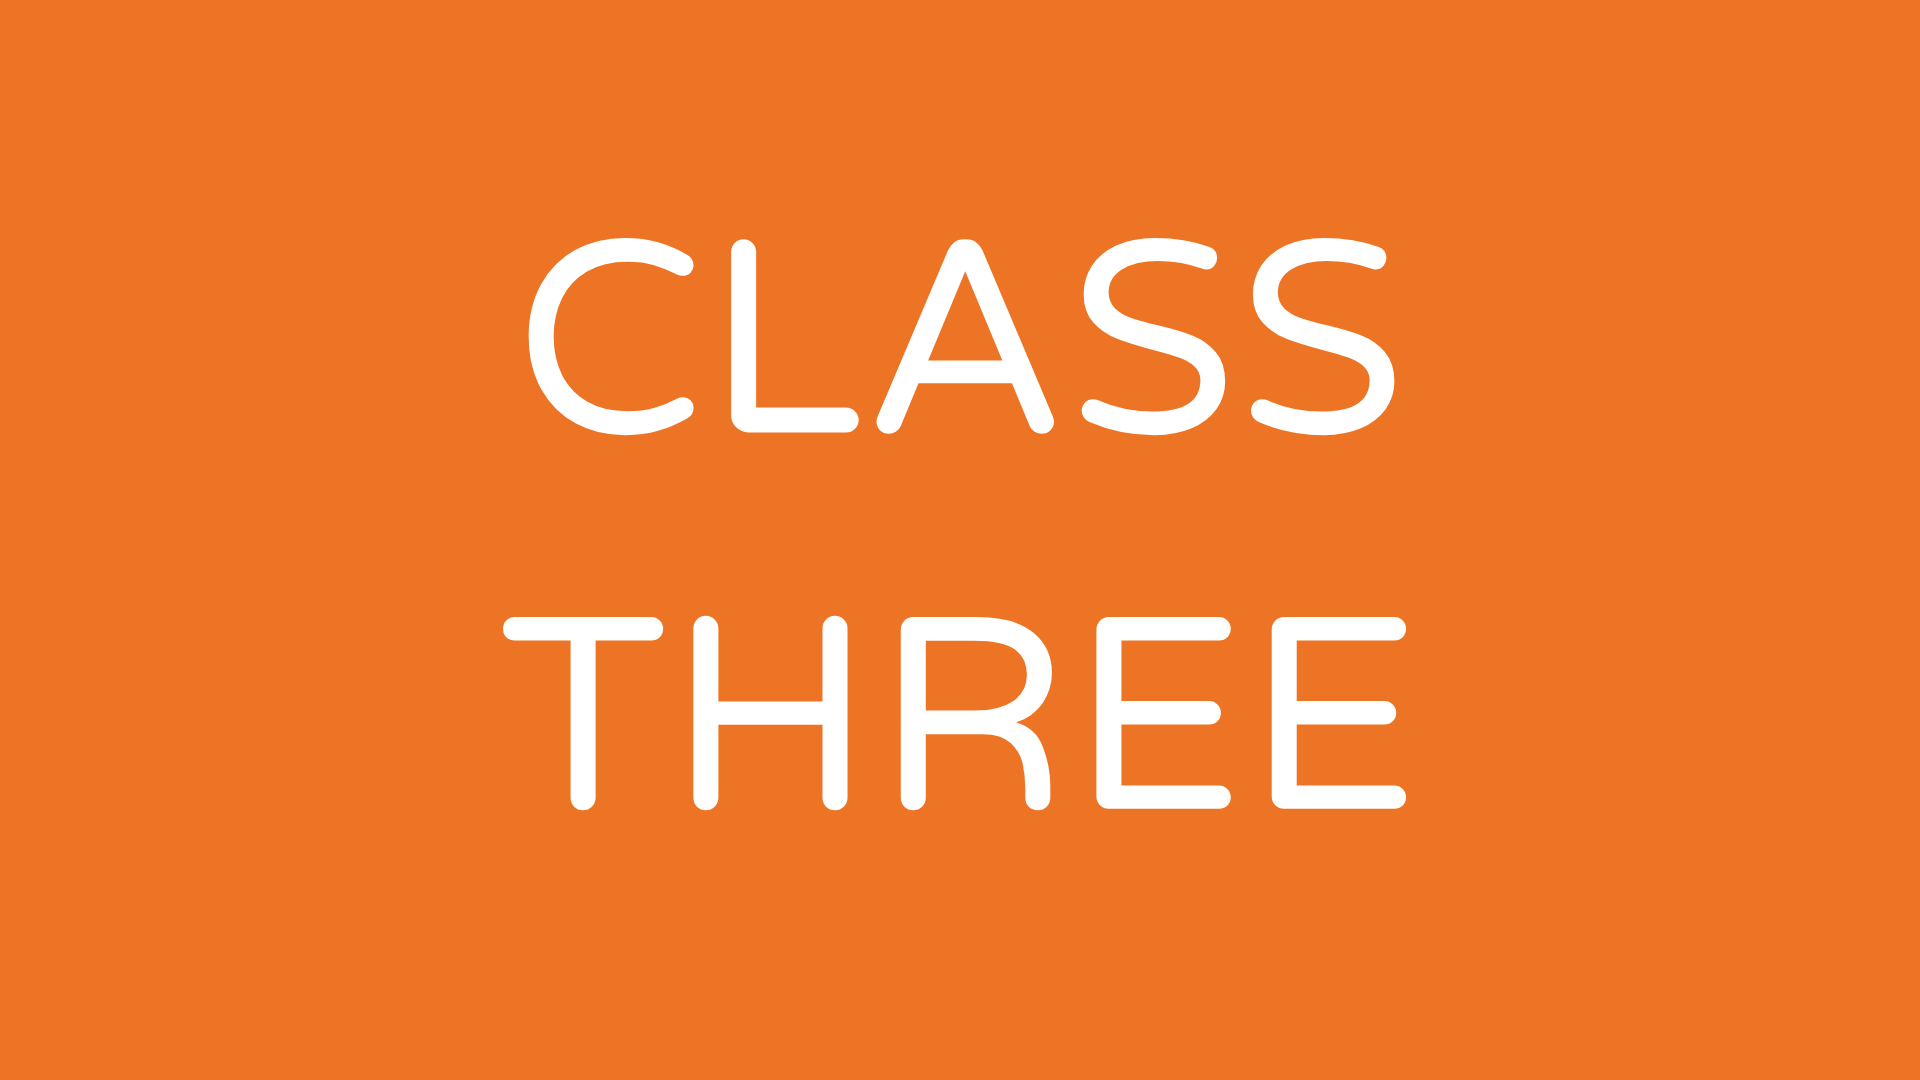 Remote Class Three Cleaning Business Coaching